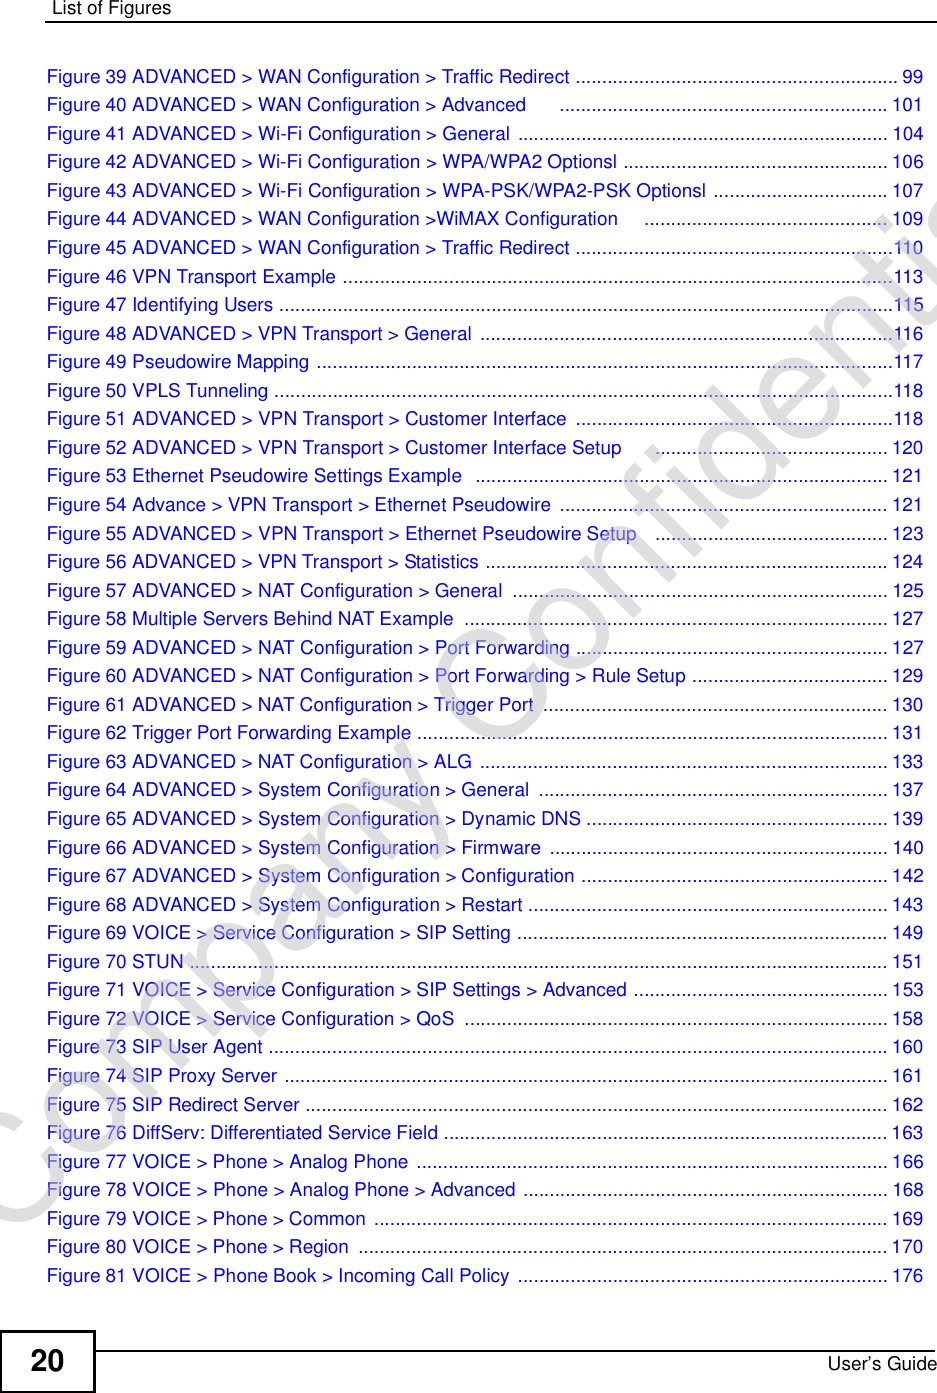 List of FiguresUser’s Guide20Figure 39 ADVANCED &gt; WAN Configuration &gt; Traffic Redirect .............................................................99Figure 40 ADVANCED &gt; WAN Configuration &gt; Advanced      ..............................................................101Figure 41 ADVANCED &gt; Wi-Fi Configuration &gt; General ......................................................................104Figure 42 ADVANCED &gt; Wi-Fi Configuration &gt; WPA/WPA2 Optionsl ..................................................106Figure 43 ADVANCED &gt; Wi-Fi Configuration &gt; WPA-PSK/WPA2-PSK Optionsl .................................107Figure 44 ADVANCED &gt; WAN Configuration &gt;WiMAX Configuration    ..............................................109Figure 45 ADVANCED &gt; WAN Configuration &gt; Traffic Redirect ............................................................110Figure 46 VPN Transport Example ........................................................................................................113Figure 47 Identifying Users ....................................................................................................................115Figure 48 ADVANCED &gt; VPN Transport &gt; General ..............................................................................116Figure 49 Pseudowire Mapping .............................................................................................................117Figure 50 VPLS Tunneling .....................................................................................................................118Figure 51 ADVANCED &gt; VPN Transport &gt; Customer Interface ............................................................118Figure 52 ADVANCED &gt; VPN Transport &gt; Customer Interface Setup      ............................................120Figure 53 Ethernet Pseudowire Settings Example  ..............................................................................121Figure 54 Advance &gt; VPN Transport &gt; Ethernet Pseudowire ..............................................................121Figure 55 ADVANCED &gt; VPN Transport &gt; Ethernet Pseudowire Setup   ............................................123Figure 56 ADVANCED &gt; VPN Transport &gt; Statistics ............................................................................124Figure 57 ADVANCED &gt; NAT Configuration &gt; General .......................................................................125Figure 58 Multiple Servers Behind NAT Example ................................................................................127Figure 59 ADVANCED &gt; NAT Configuration &gt; Port Forwarding ...........................................................127Figure 60 ADVANCED &gt; NAT Configuration &gt; Port Forwarding &gt; Rule Setup .....................................129Figure 61 ADVANCED &gt; NAT Configuration &gt; Trigger Port .................................................................130Figure 62 Trigger Port Forwarding Example .........................................................................................131Figure 63 ADVANCED &gt; NAT Configuration &gt; ALG .............................................................................133Figure 64 ADVANCED &gt; System Configuration &gt; General ..................................................................137Figure 65 ADVANCED &gt; System Configuration &gt; Dynamic DNS .........................................................139Figure 66 ADVANCED &gt; System Configuration &gt; Firmware ................................................................140Figure 67 ADVANCED &gt; System Configuration &gt; Configuration ..........................................................142Figure 68 ADVANCED &gt; System Configuration &gt; Restart ....................................................................143Figure 69 VOICE &gt; Service Configuration &gt; SIP Setting ......................................................................149Figure 70 STUN ....................................................................................................................................151Figure 71 VOICE &gt; Service Configuration &gt; SIP Settings &gt; Advanced ................................................153Figure 72 VOICE &gt; Service Configuration &gt; QoS ................................................................................158Figure 73 SIP User Agent .....................................................................................................................160Figure 74 SIP Proxy Server ..................................................................................................................161Figure 75 SIP Redirect Server ..............................................................................................................162Figure 76 DiffServ: Differentiated Service Field ....................................................................................163Figure 77 VOICE &gt; Phone &gt; Analog Phone .........................................................................................166Figure 78 VOICE &gt; Phone &gt; Analog Phone &gt; Advanced .....................................................................168Figure 79 VOICE &gt; Phone &gt; Common .................................................................................................169Figure 80 VOICE &gt; Phone &gt; Region ....................................................................................................170Figure 81 VOICE &gt; Phone Book &gt; Incoming Call Policy ......................................................................176Company Confidential